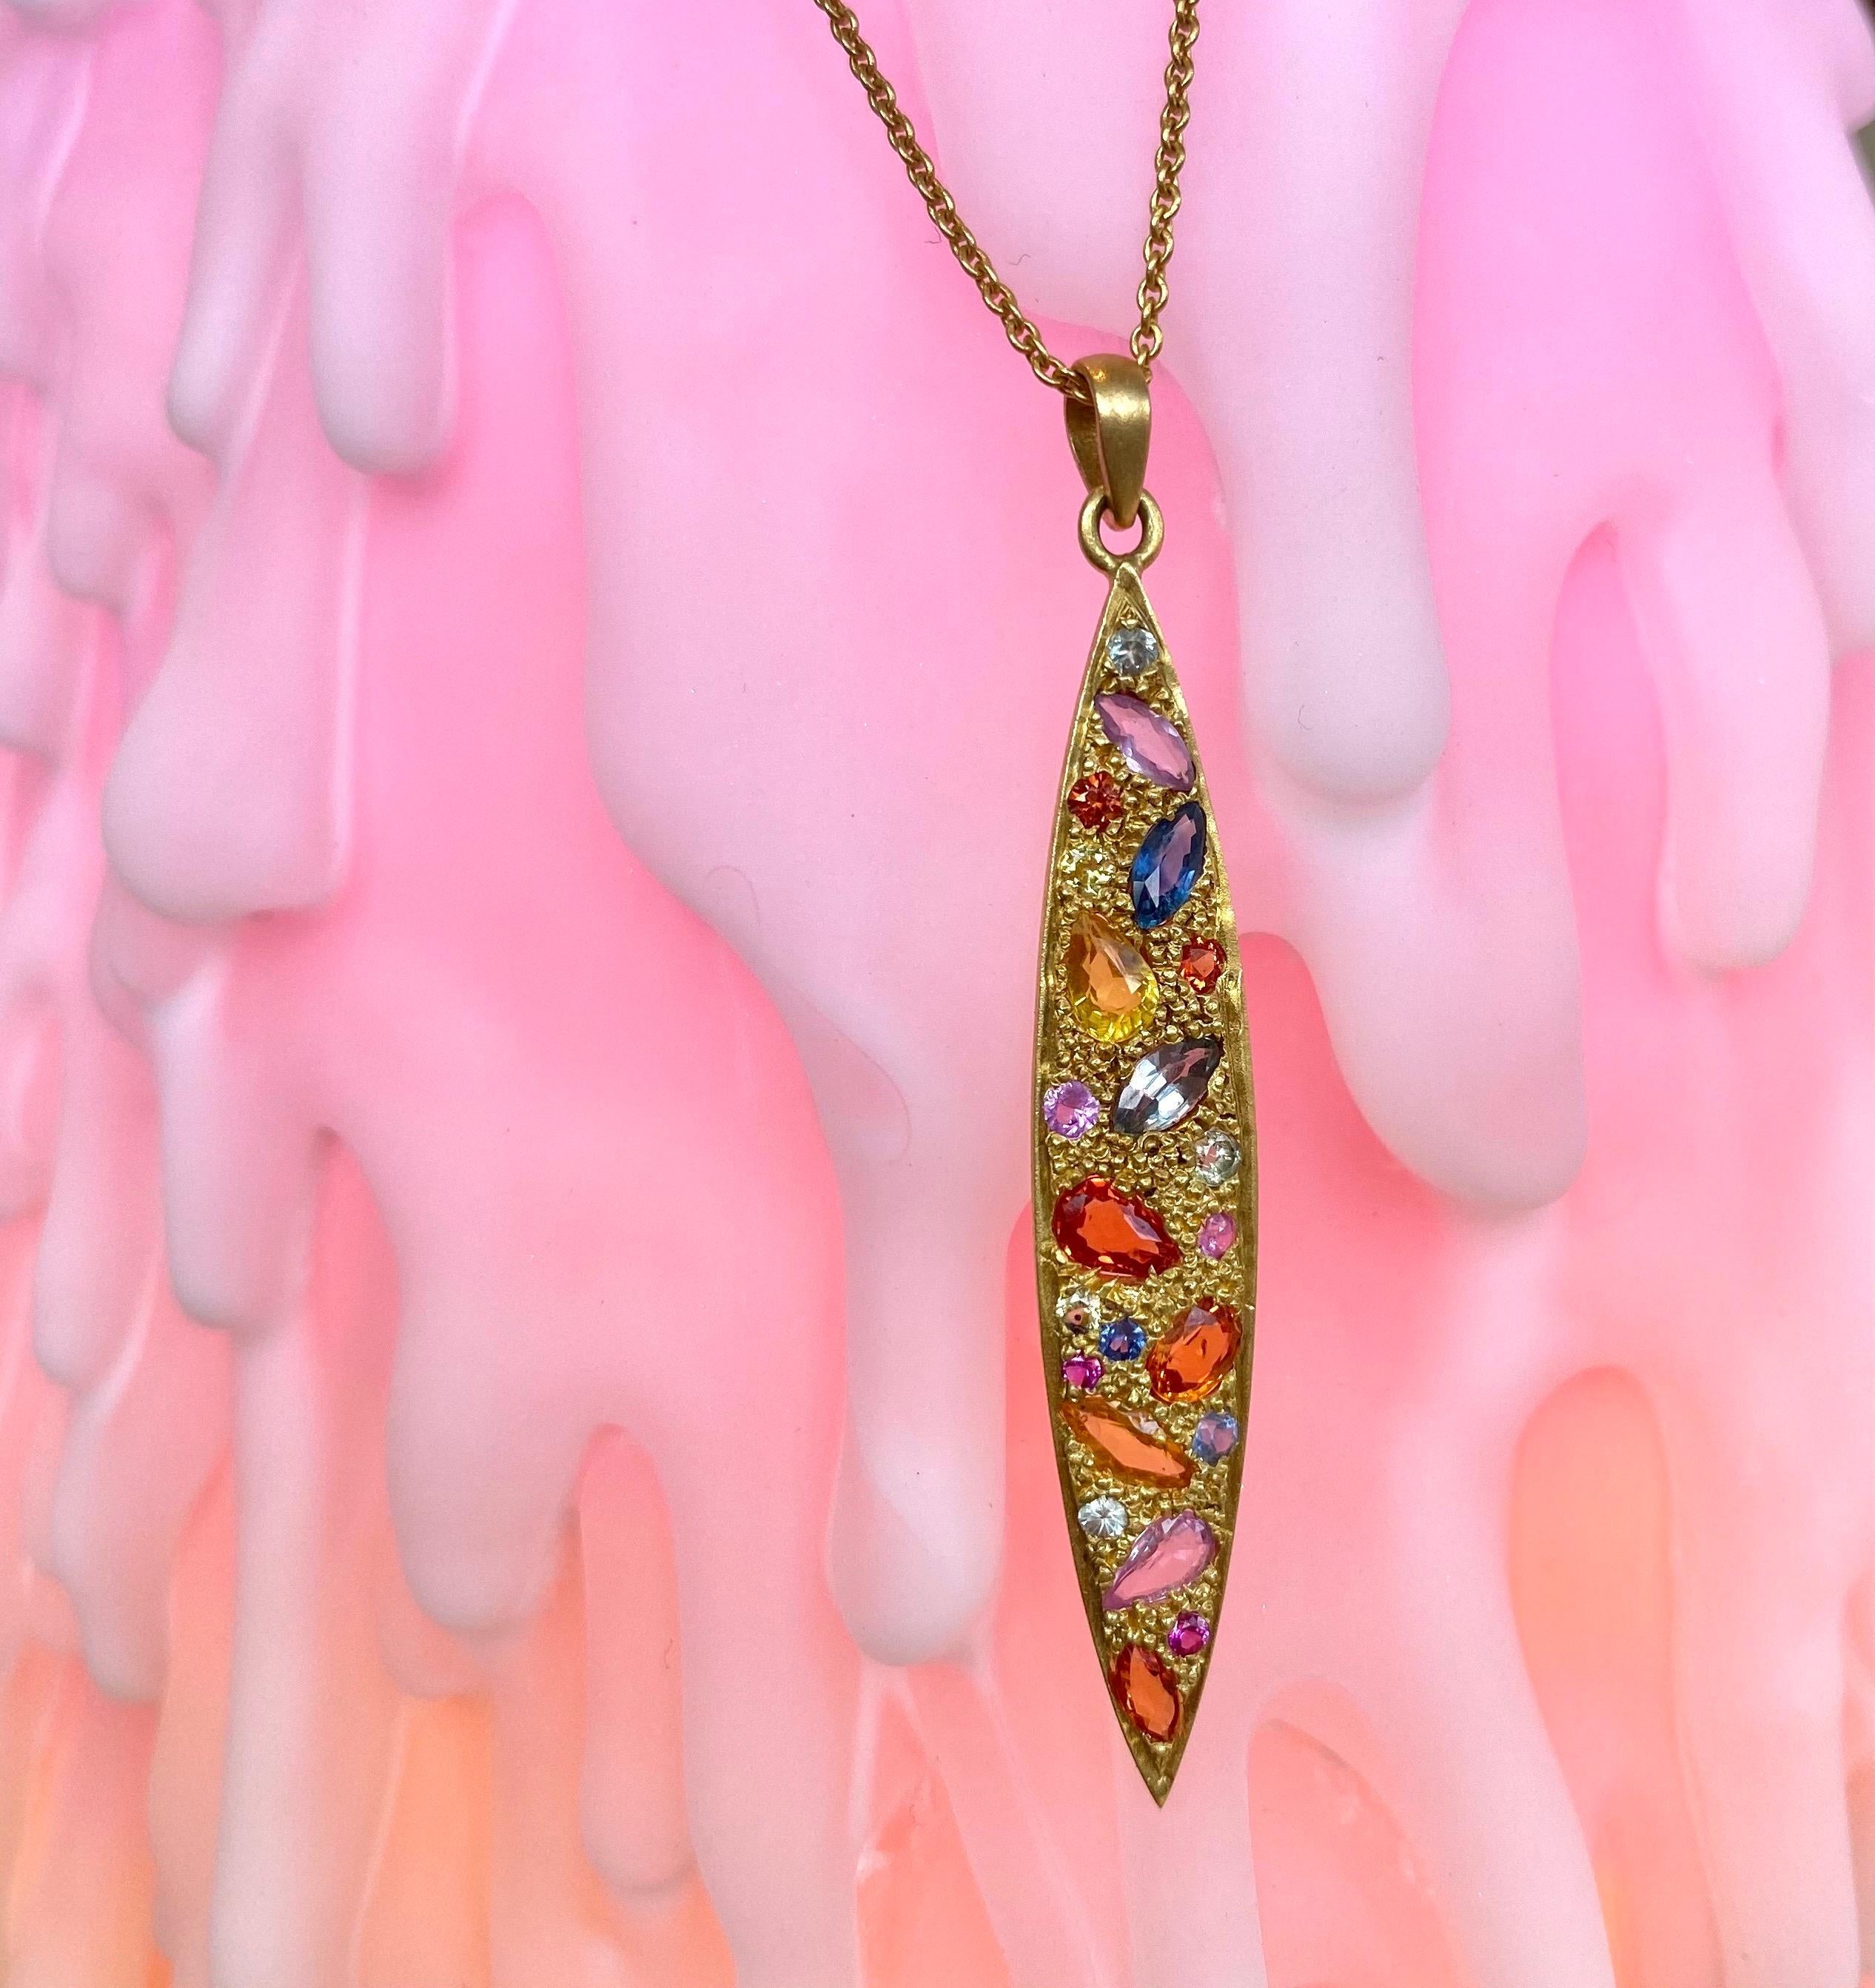 Designed by Award Winning jewelry designer, Lauren Harper, this brilliantly colorful Sapphire and 18kt Gold pendant has 2.39 carats of pink, orange, blue and yellow sapphires. This pendant goes with absolutely anything in your closet. Beautiful warm